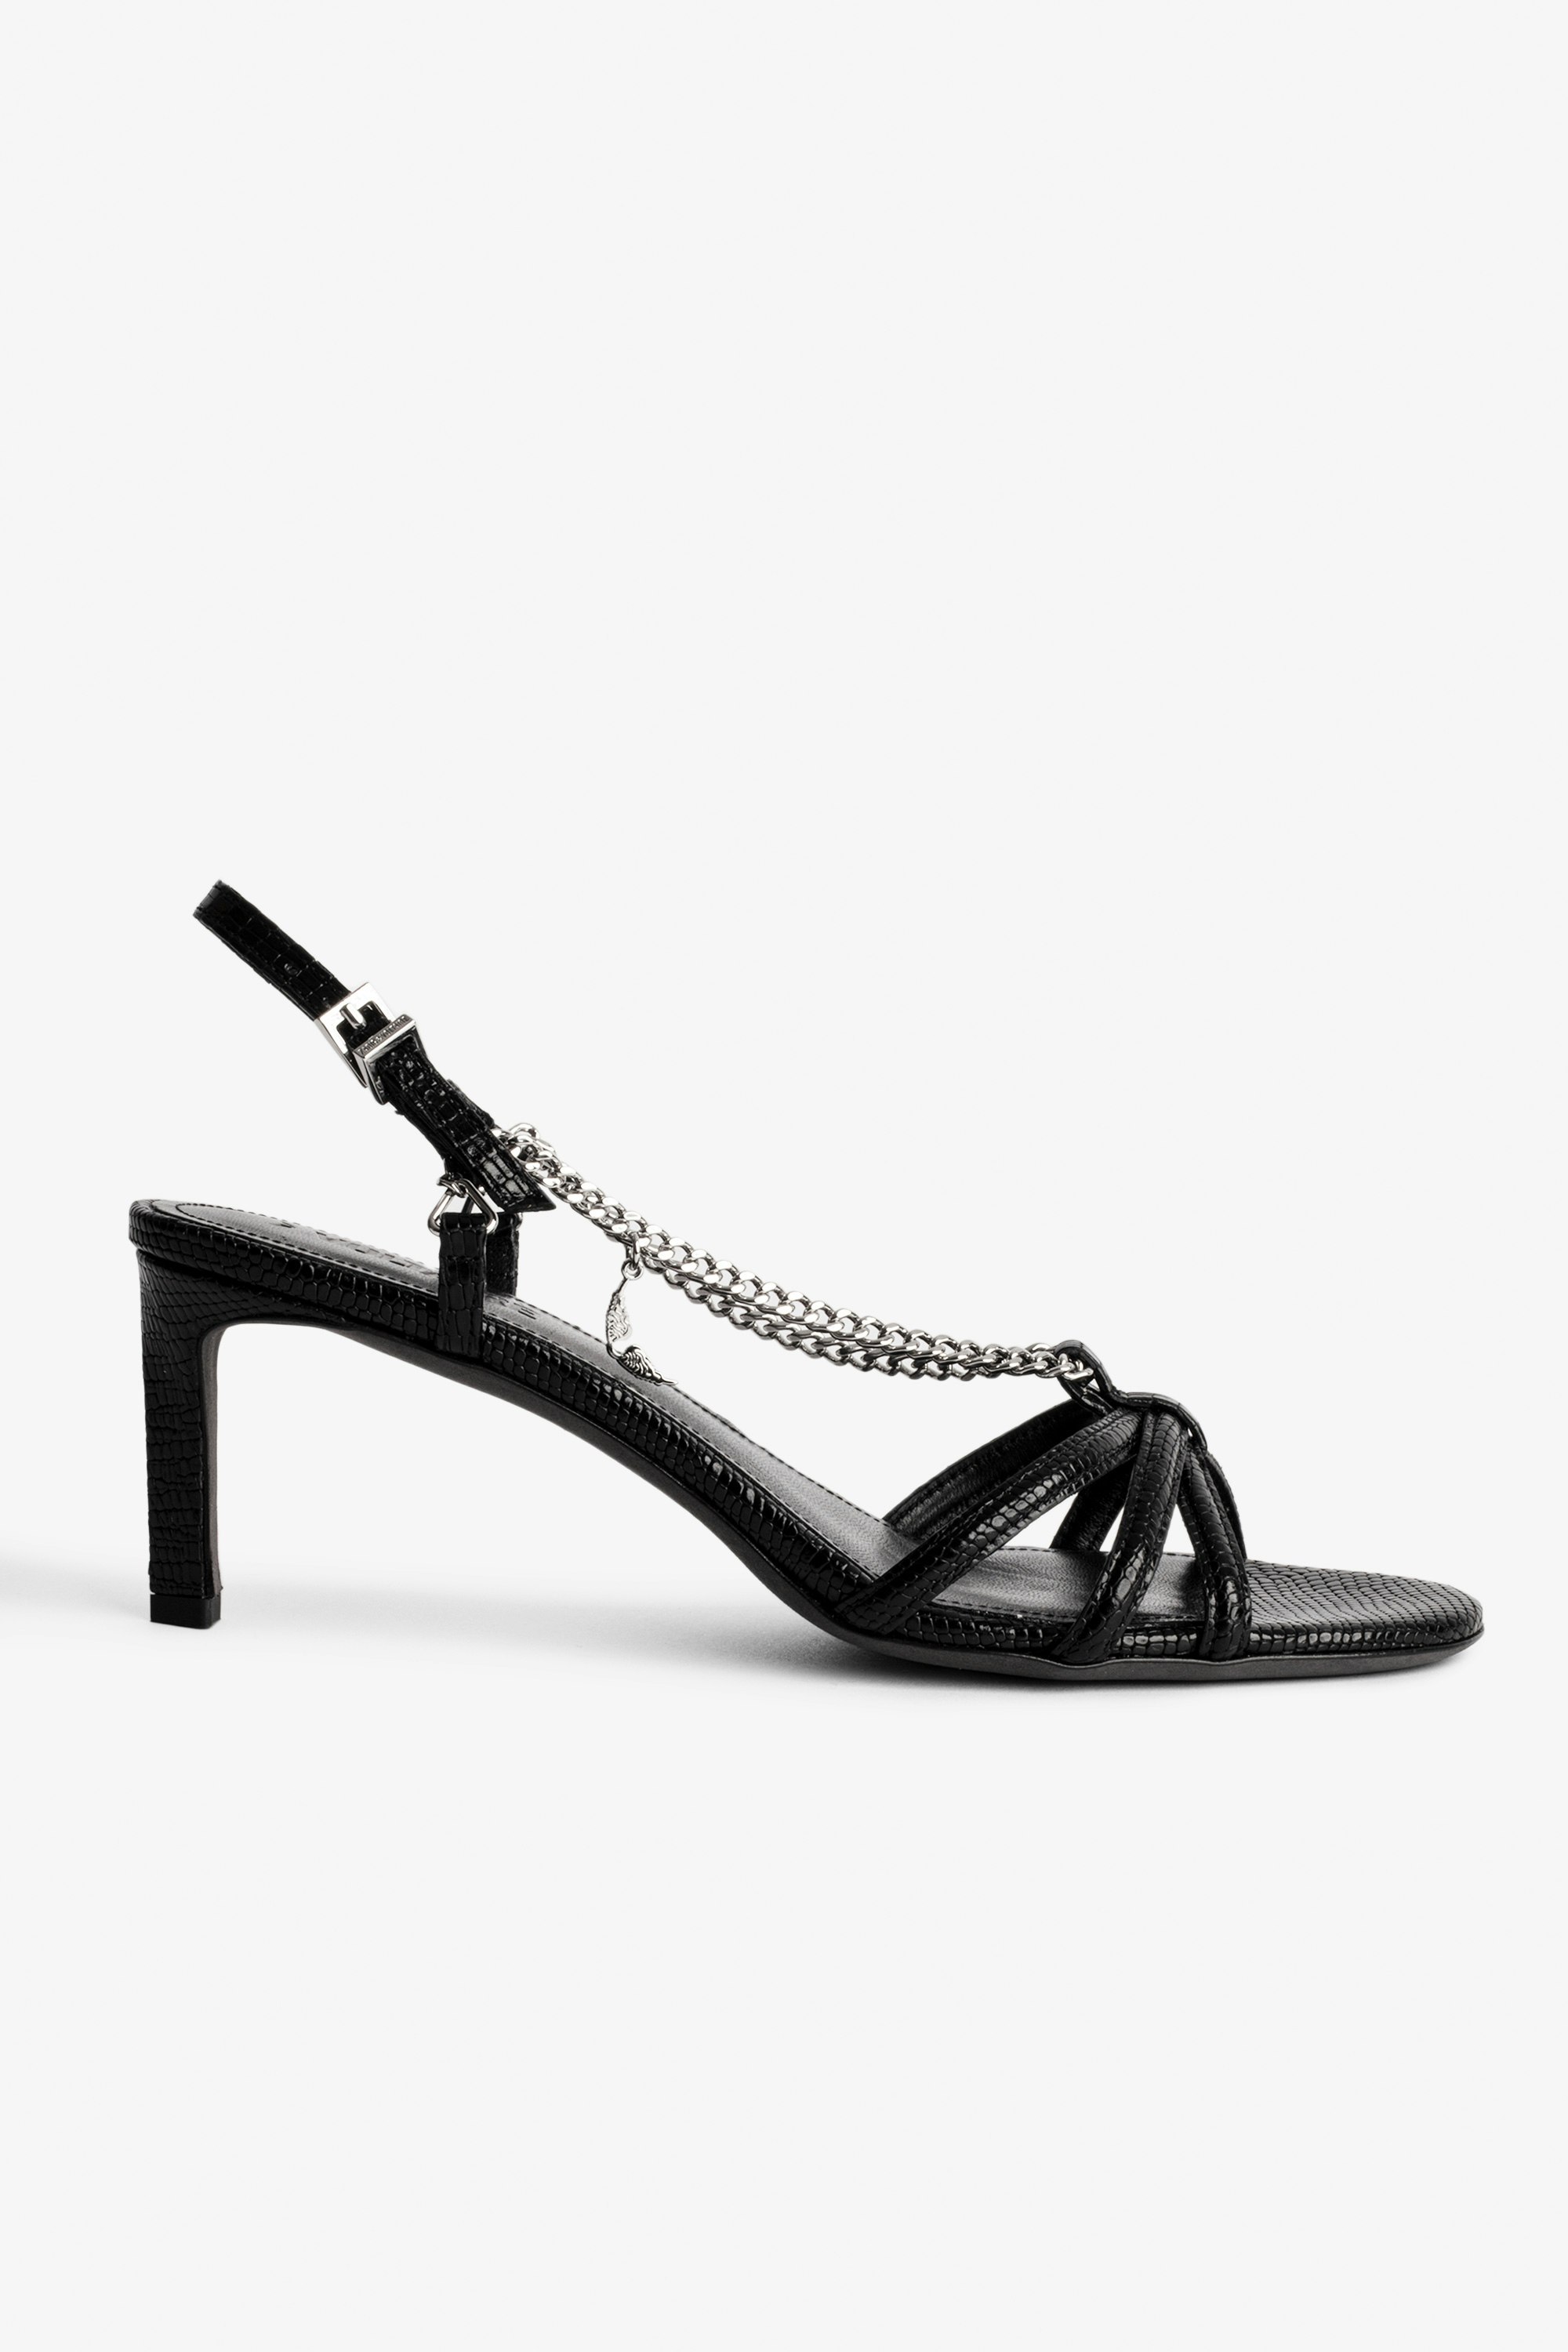 Sleepless Sandals Women’s black embossed leather sandals with straps and chains.